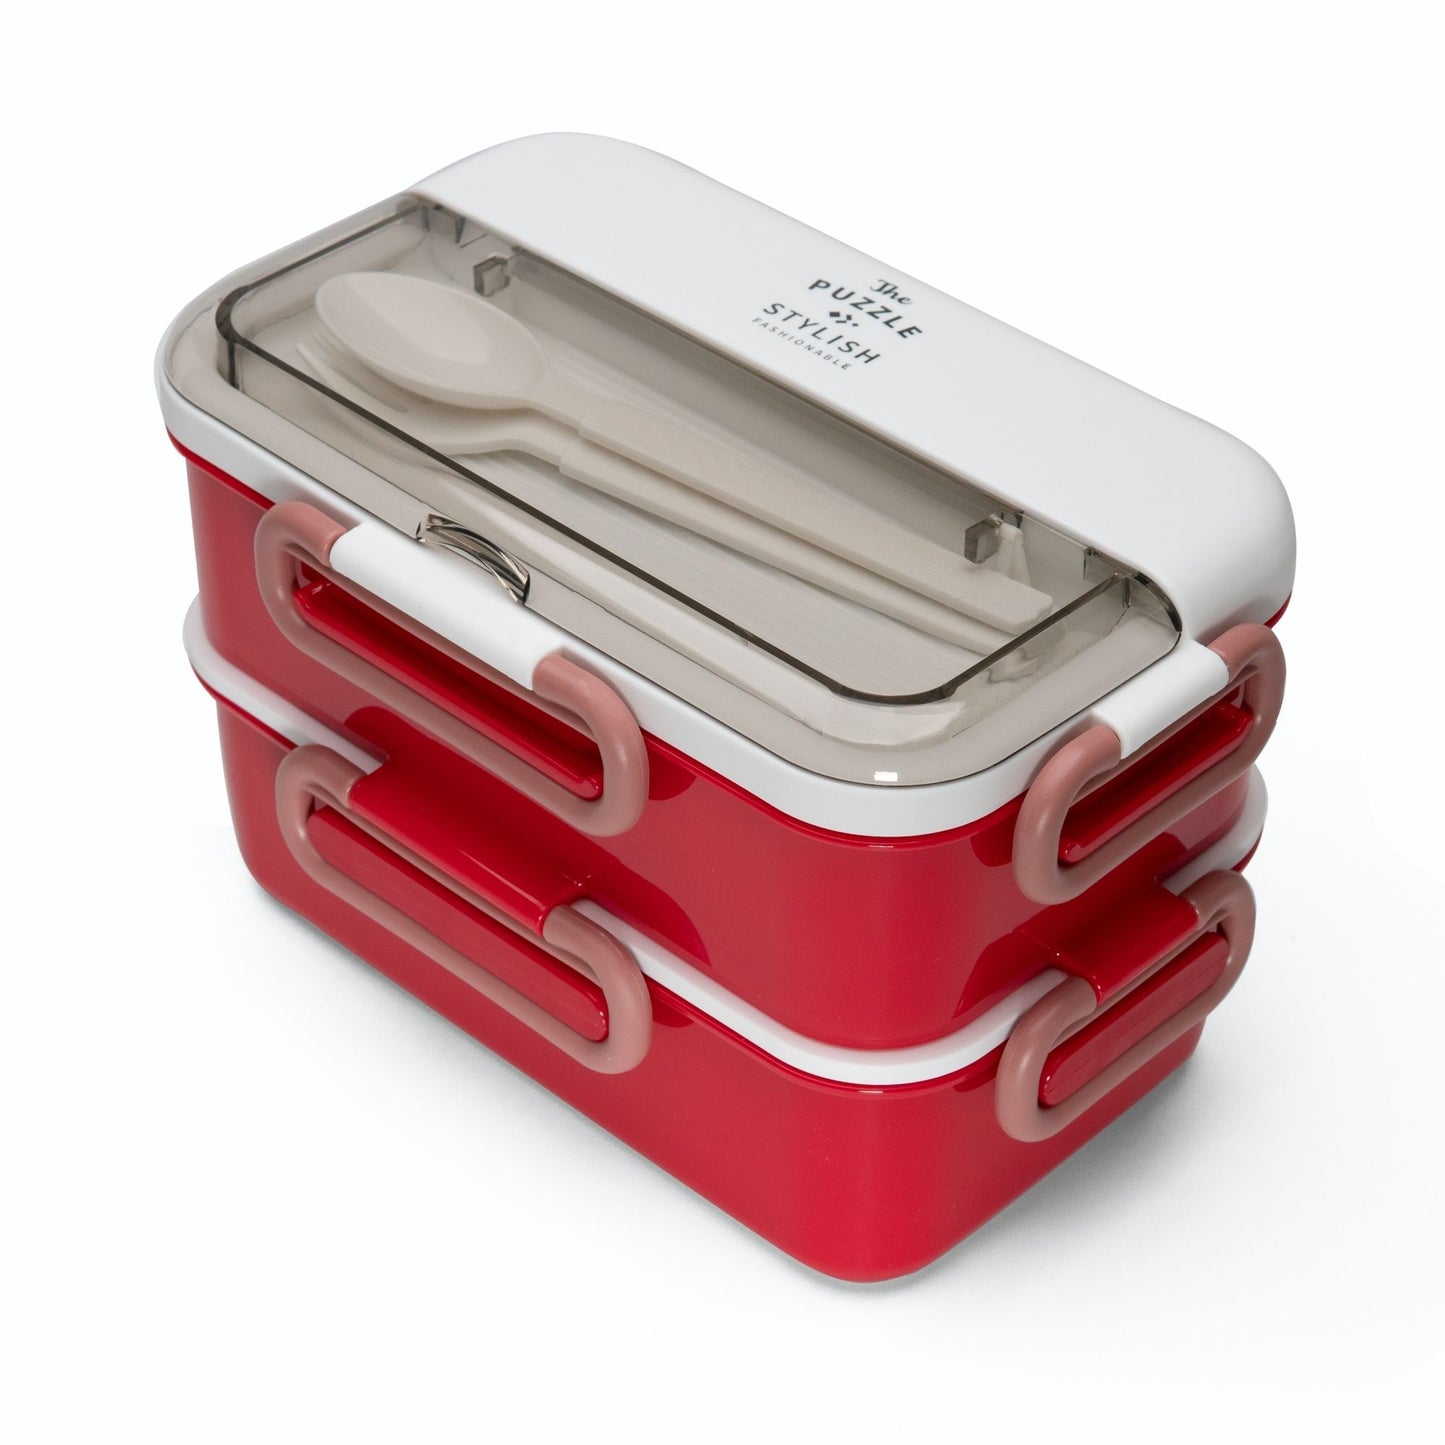 Due-Deck Stainless Steel Lunch Box - Leakproof 3 Compartment 1600 ml